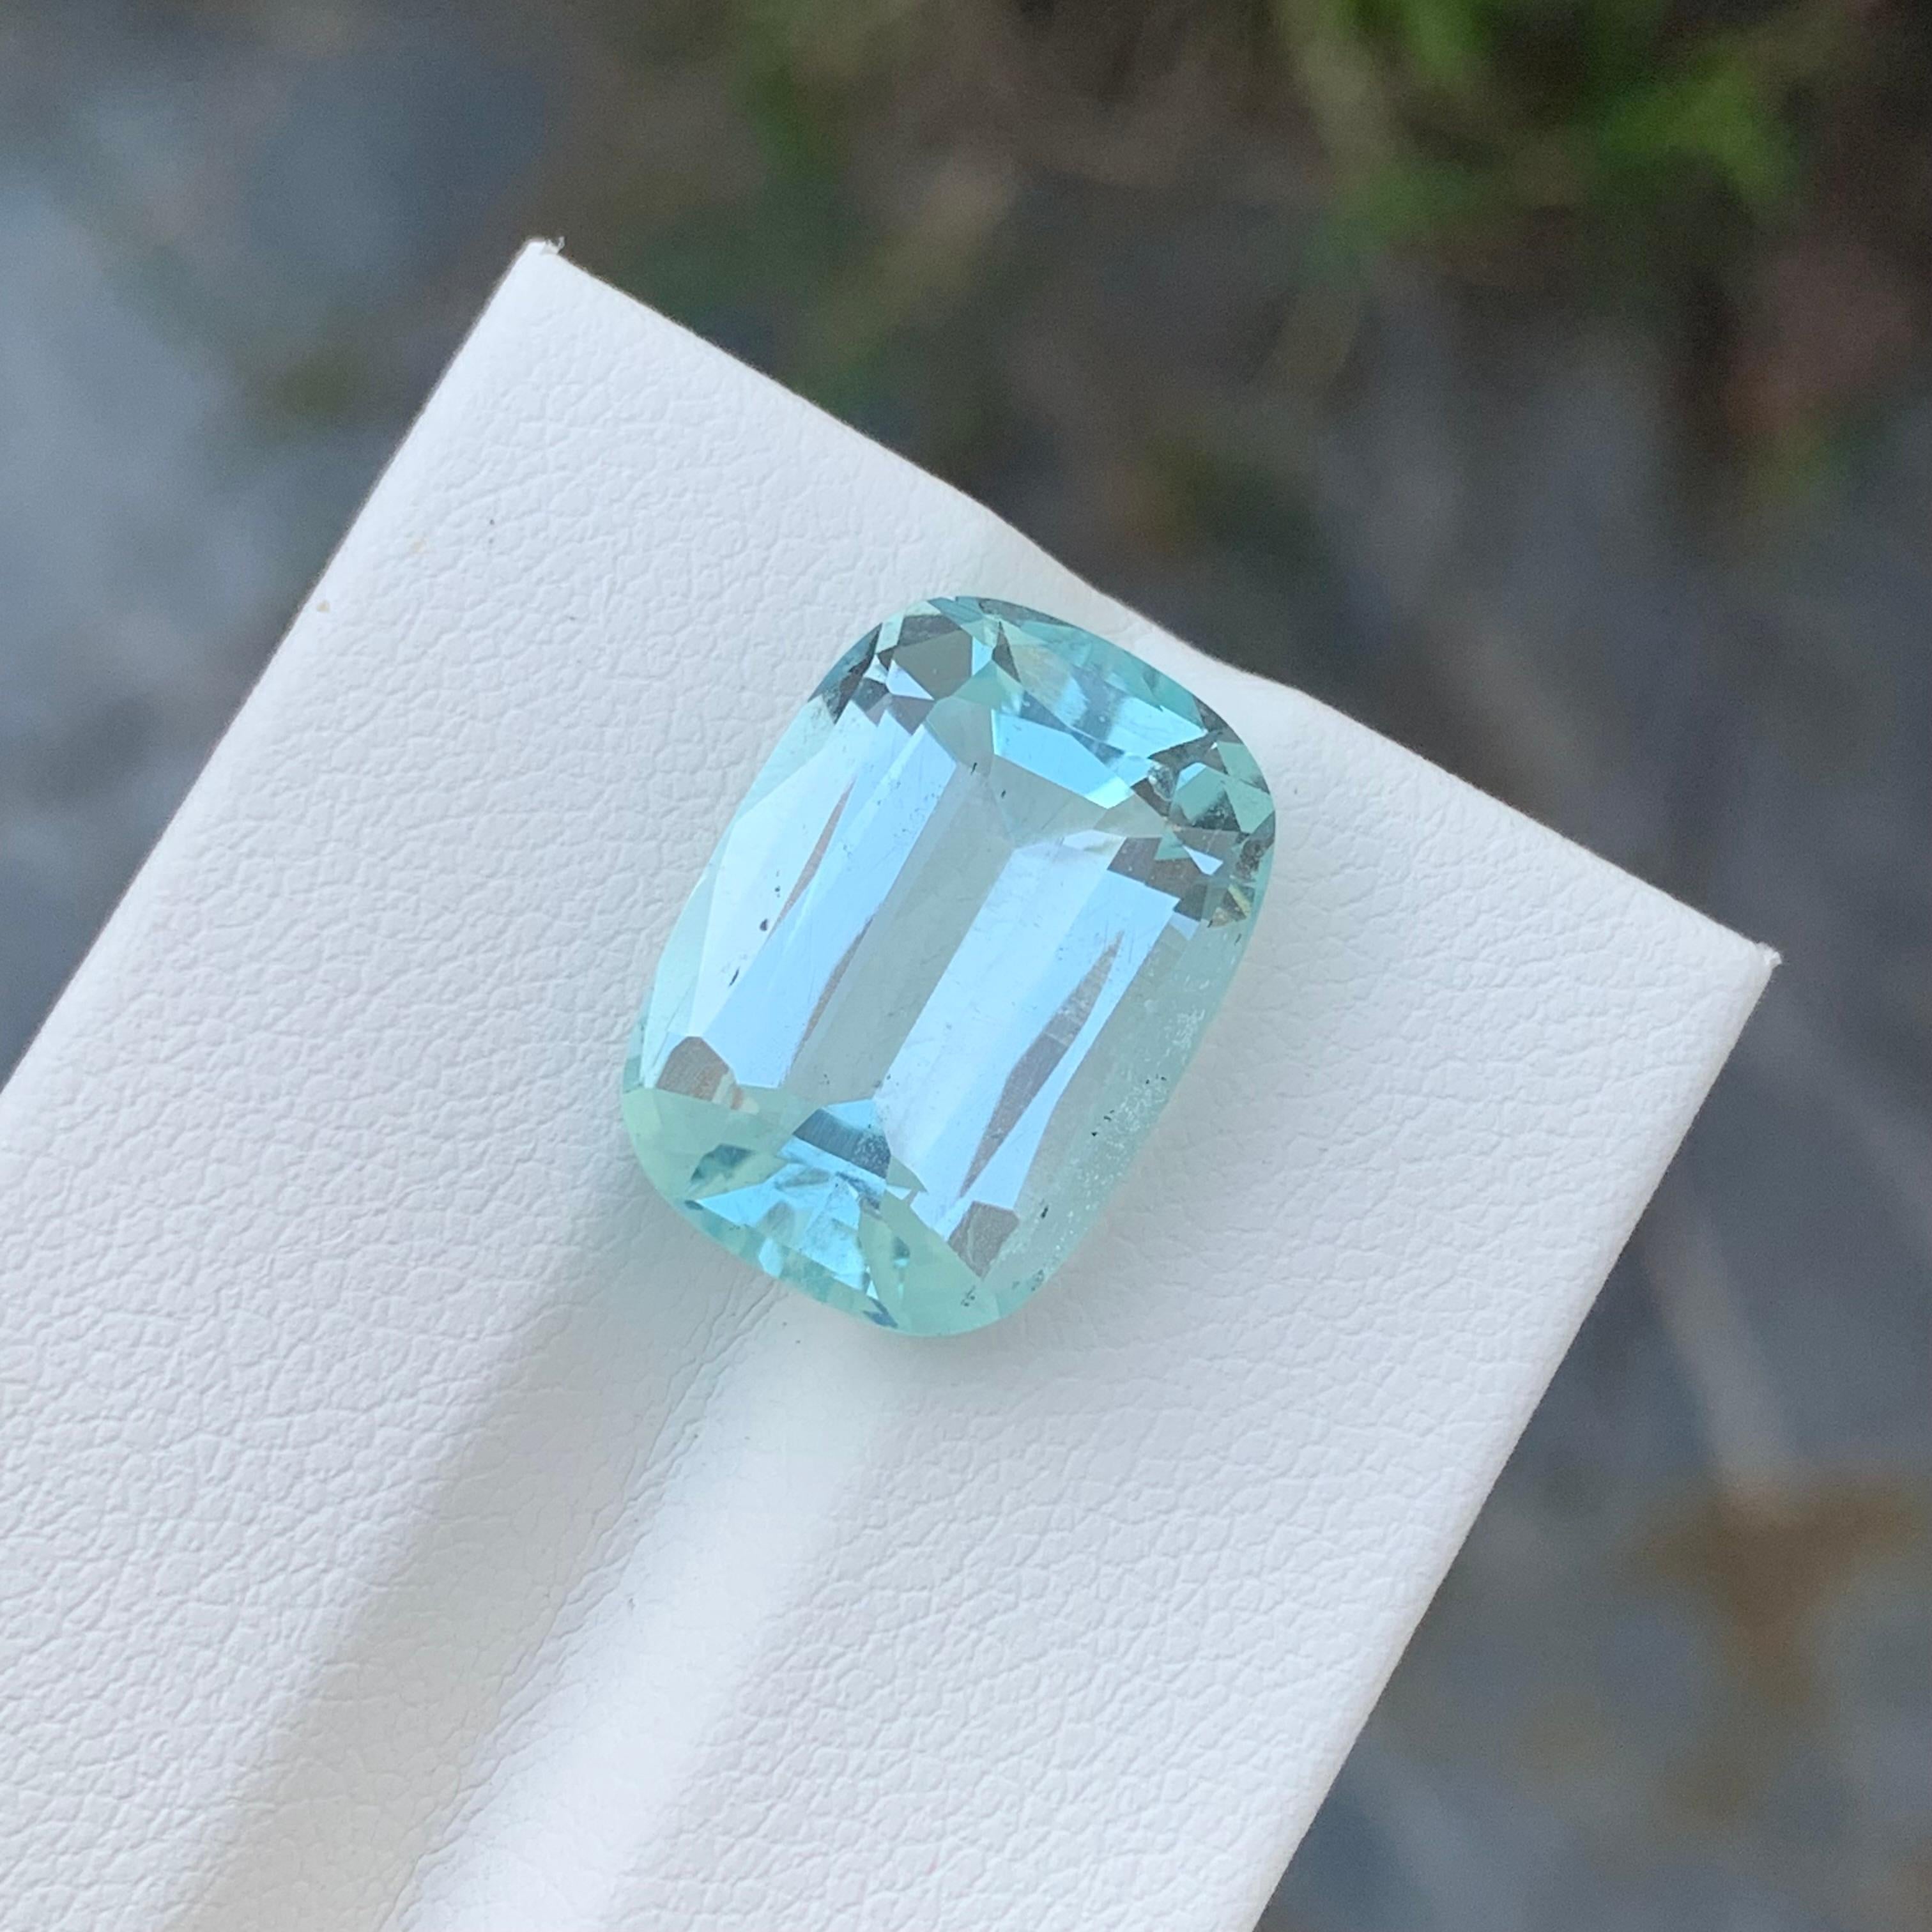 Loose Aquamarine
Weight: 10 Carat
Dimension: 16.3 x 11.7 x 7.7 Mm
Colour : Pale Blue
Origin: Shigar Valley, Pakistan
Treatment: Non
Certificate : On Demand
Shape: Cushion

Aquamarine is a captivating gemstone known for its enchanting blue-green hues